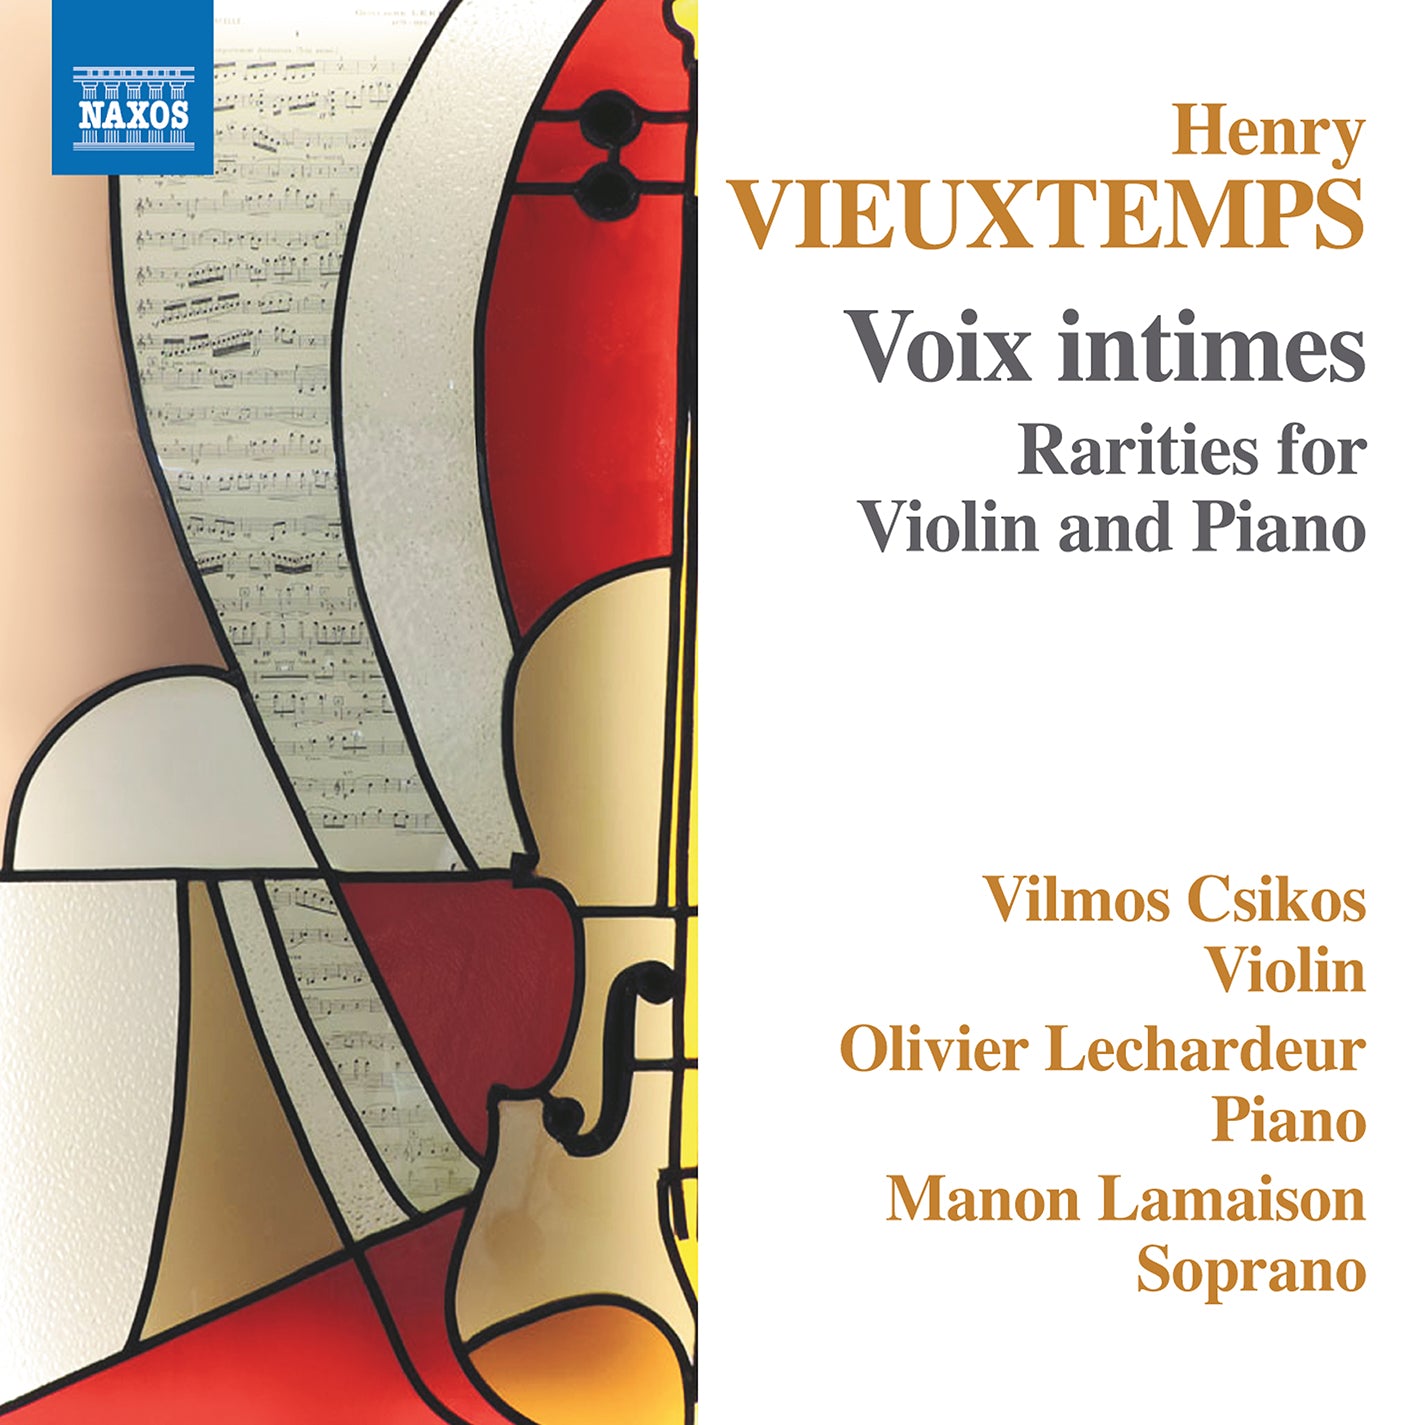 Vieuxtemps: Voix intimes - Rarities for Violin and Piano